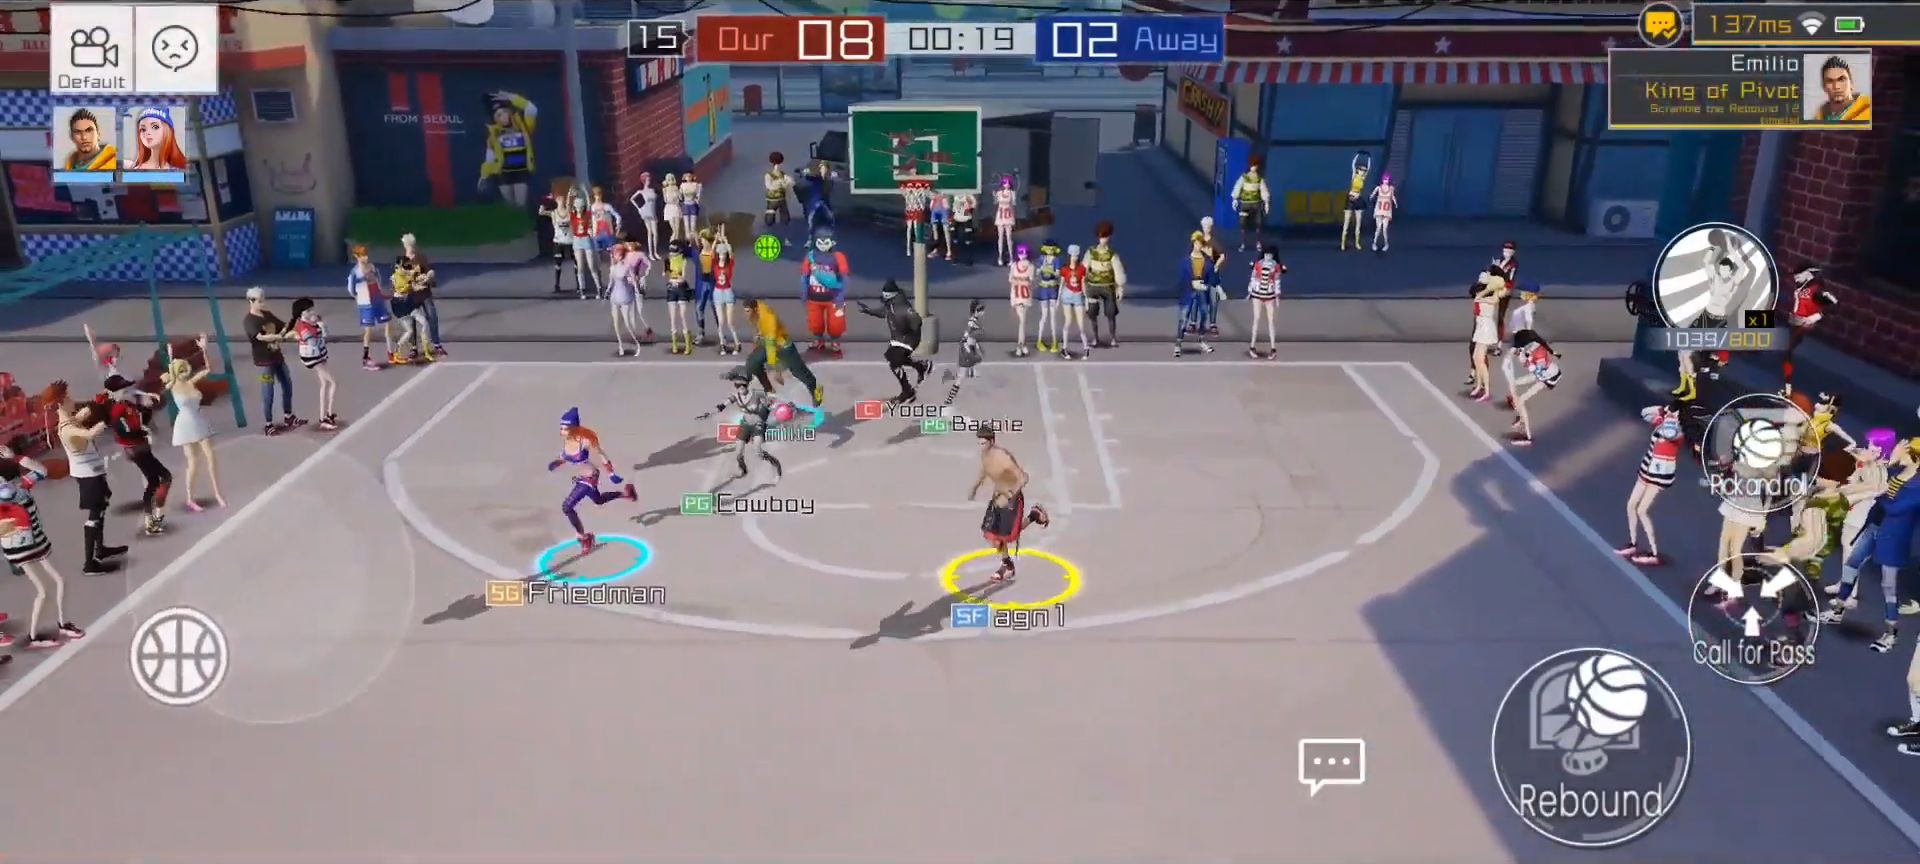 Télécharger Streetball2: On Fire pour Android gratuit.